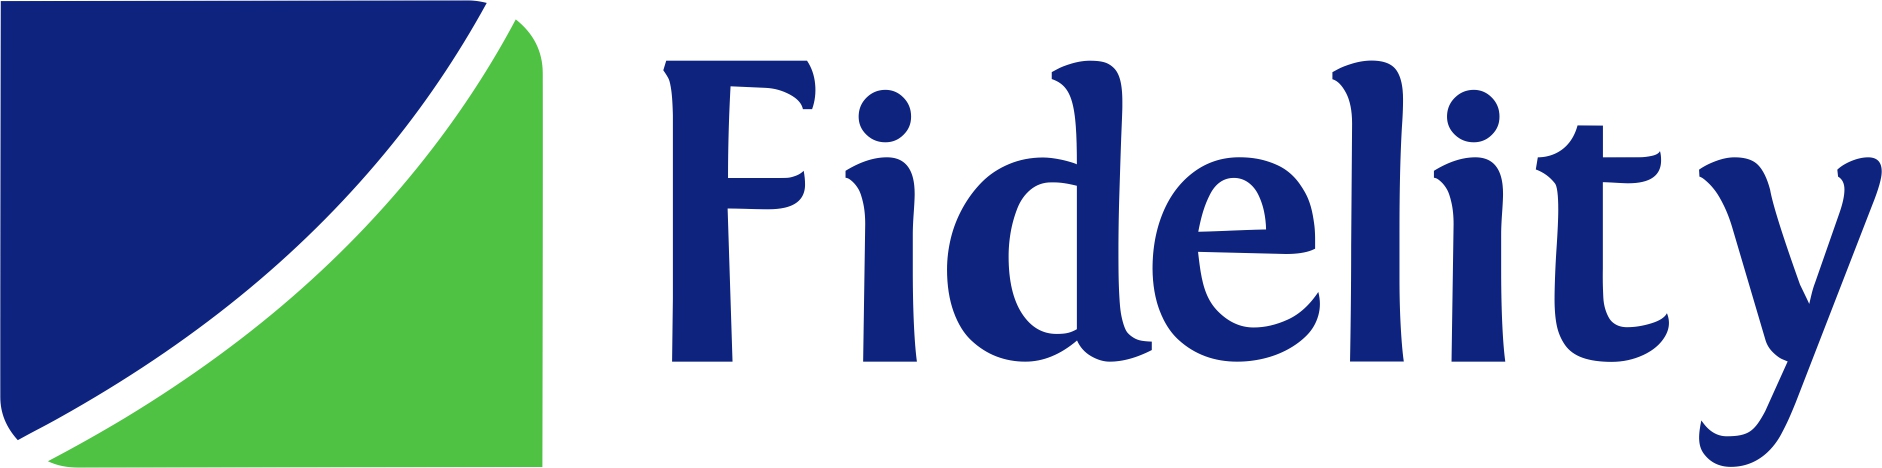 List of Fidelity Bank Branches in Lagos